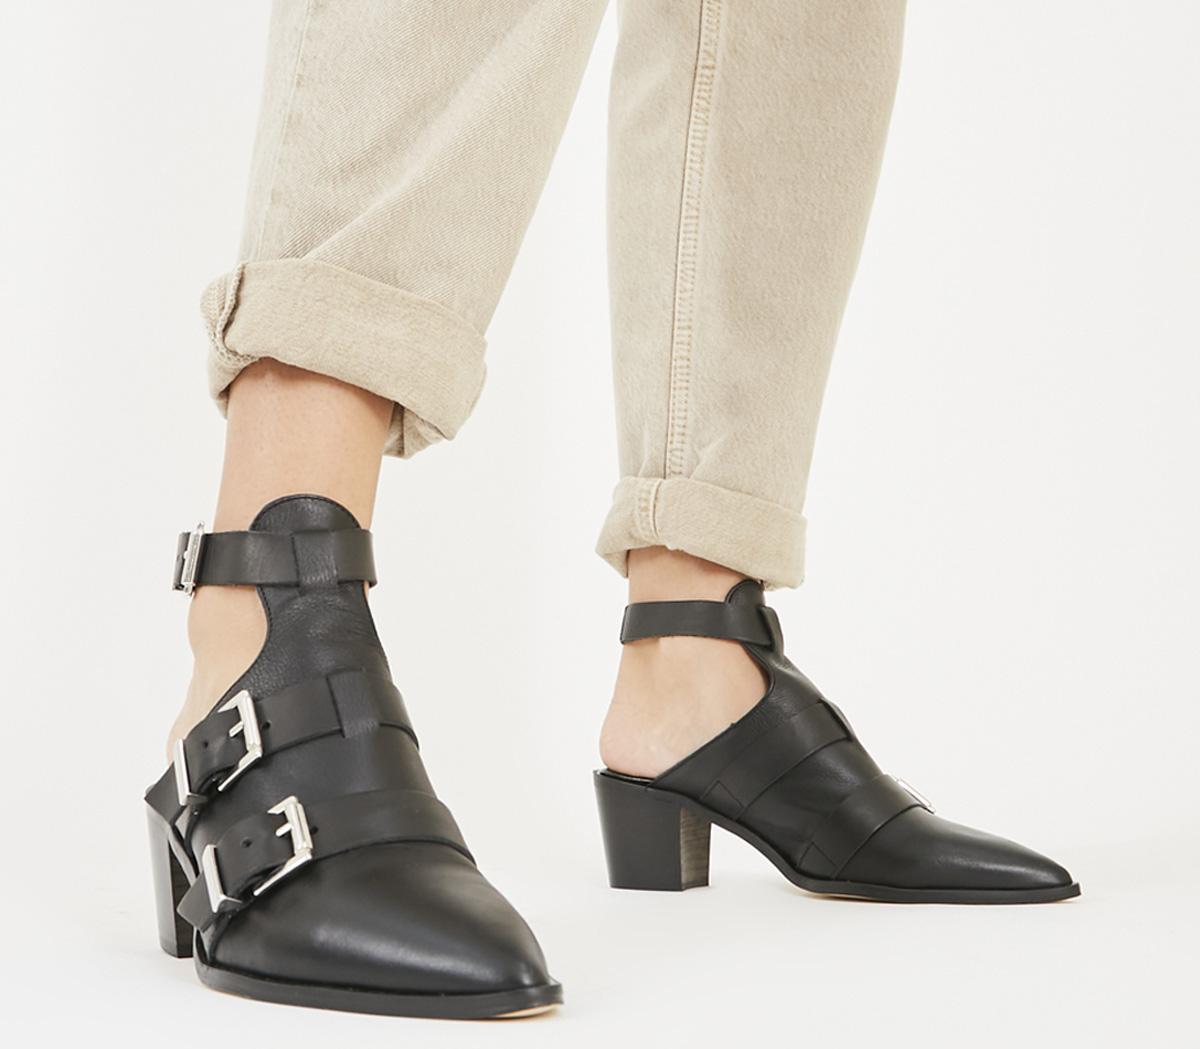 OFFICE Moscow - Buckle Shoeboot Black Leather - Mid Heels